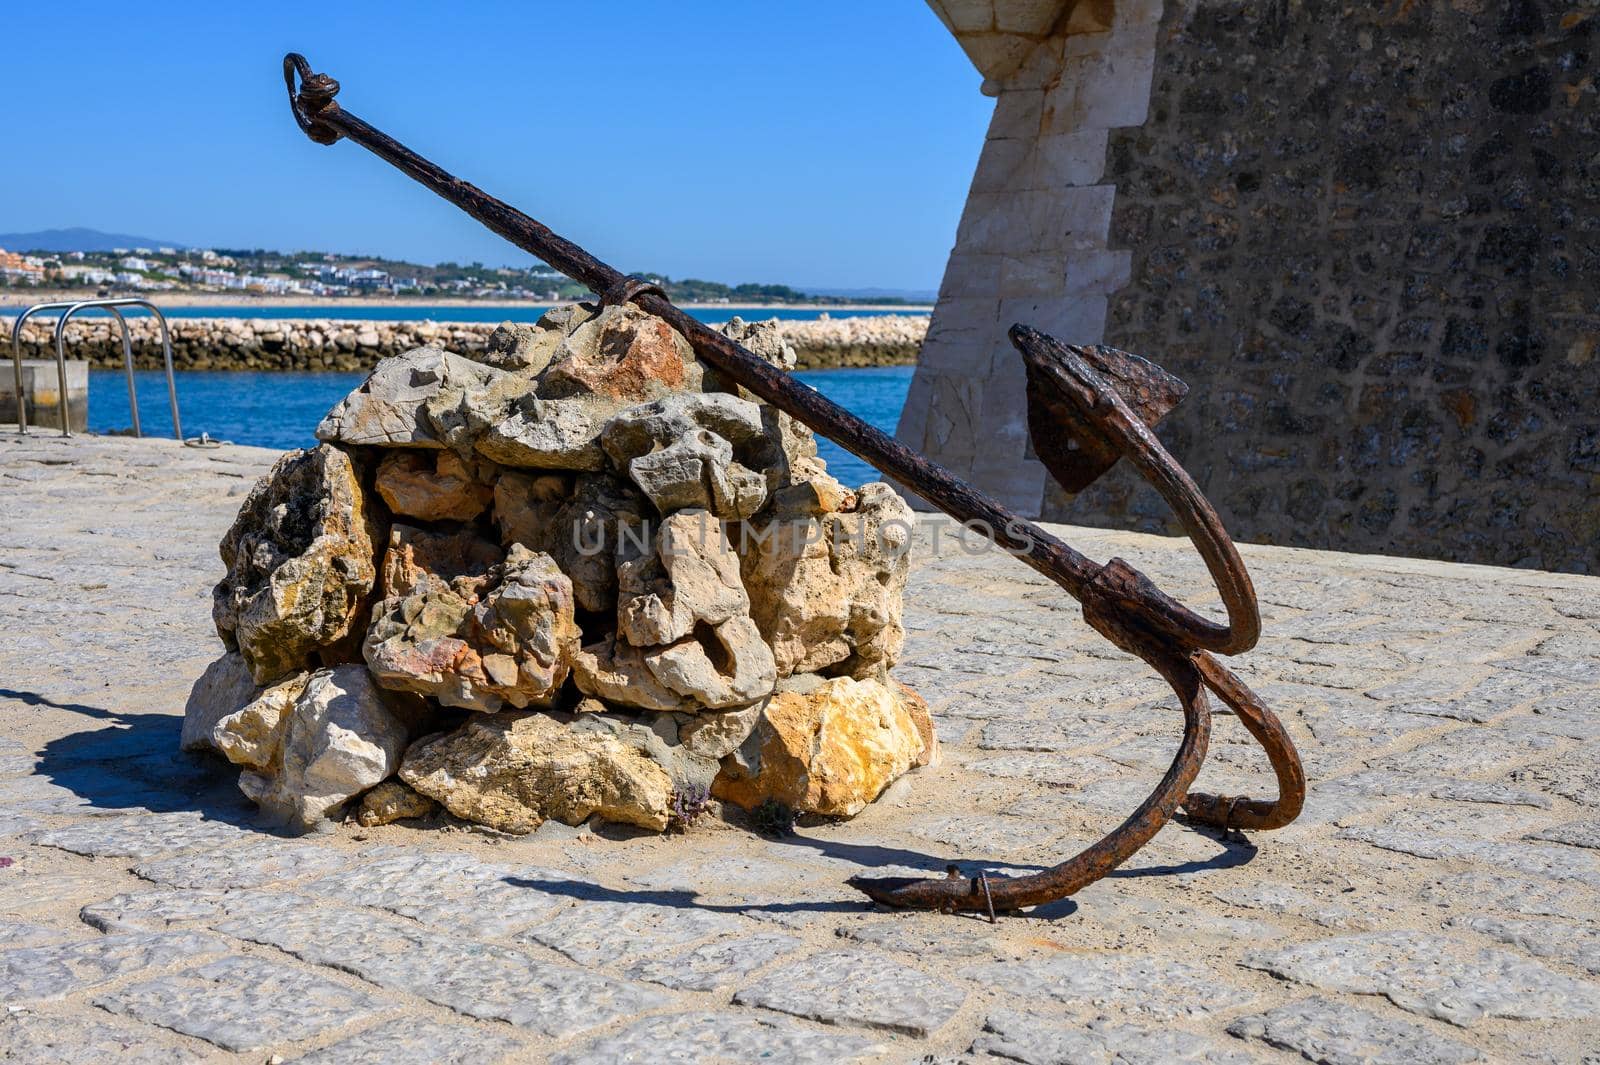 An old rusty anchor as a photographic and tourist spot.